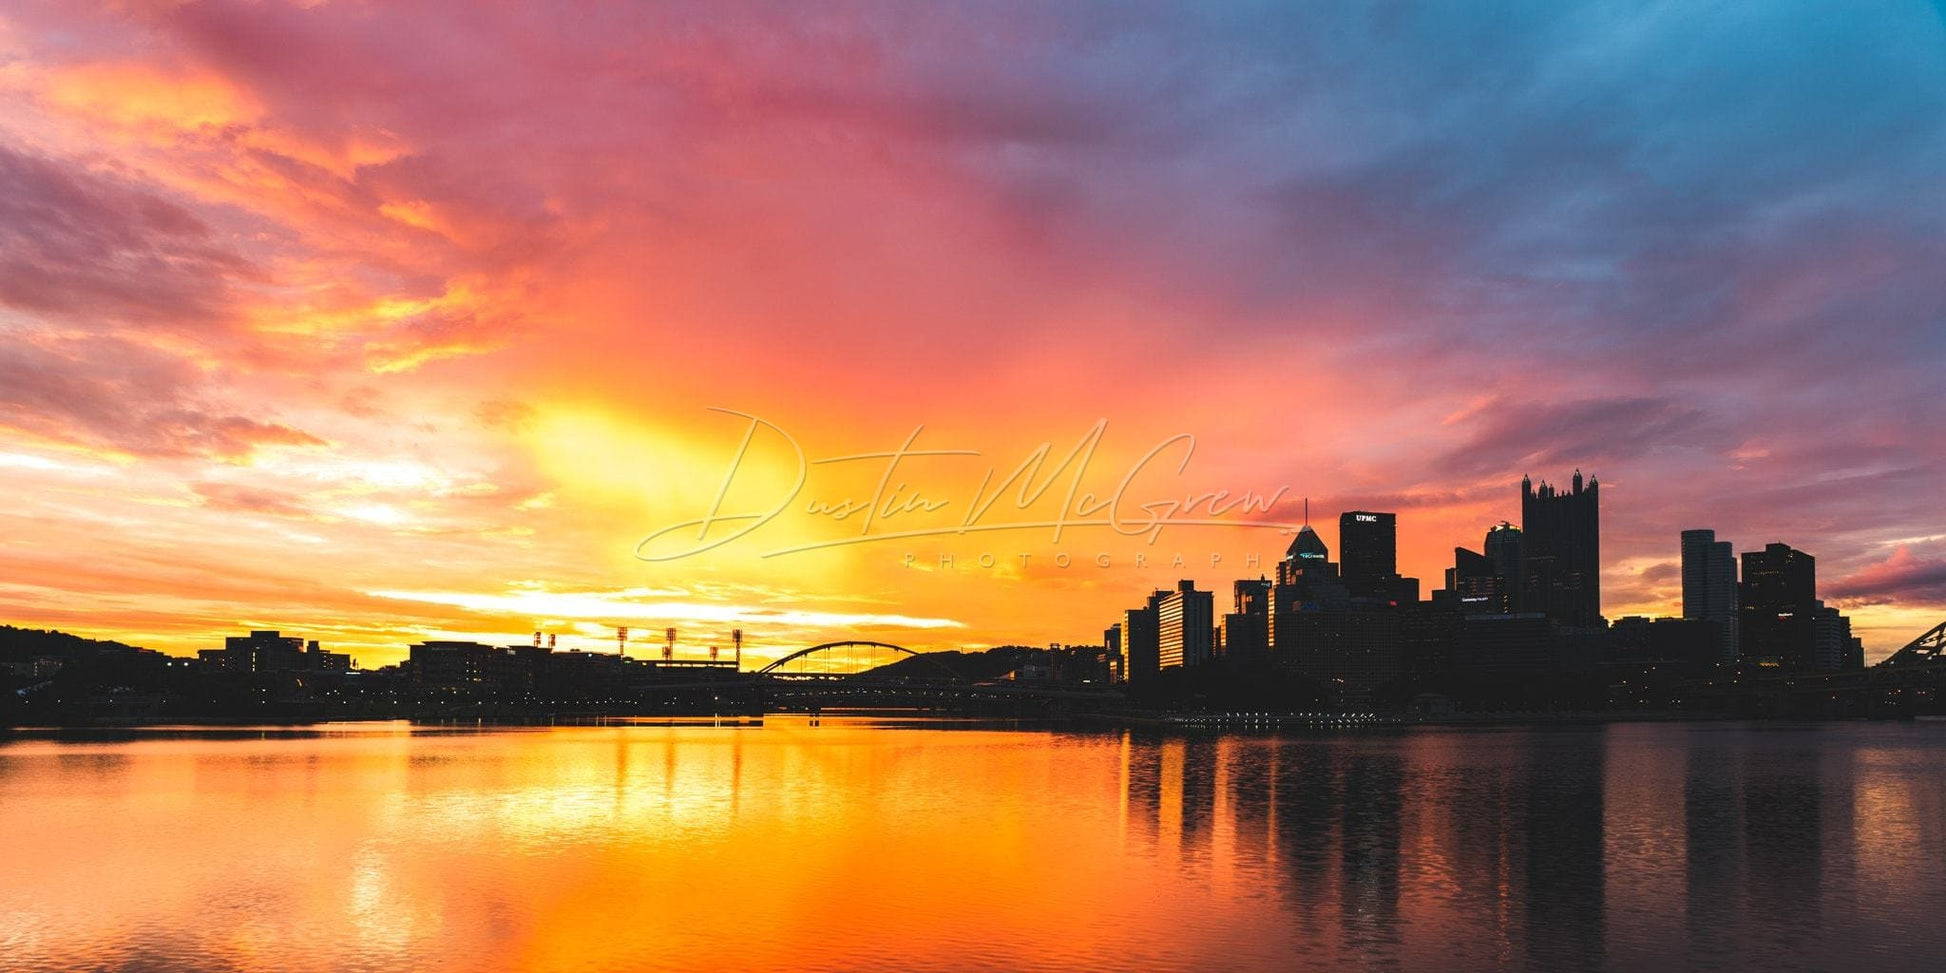 Pittsburgh Photo Print - Falling Rain Sunrise Available On Paper Metal Or Canvas